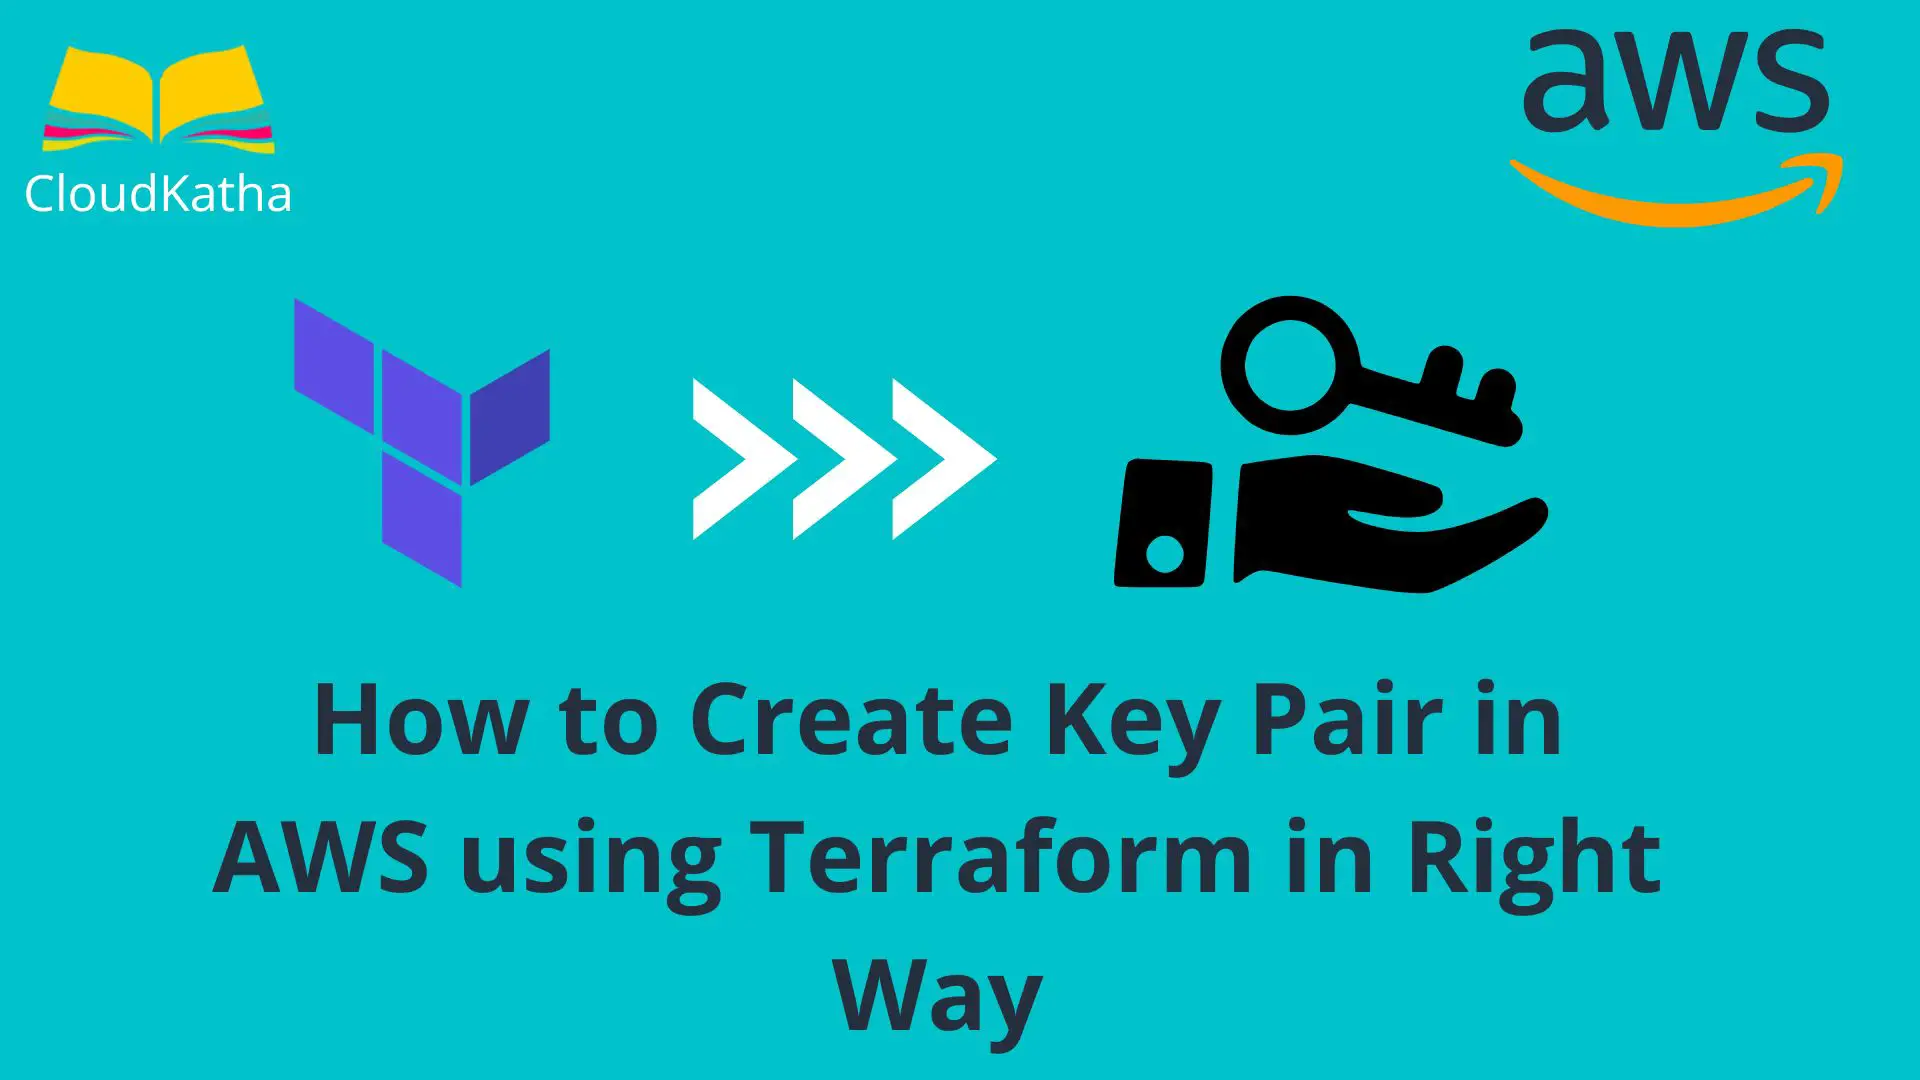 How to Create Key Pair in AWS using Terraform in Right Way